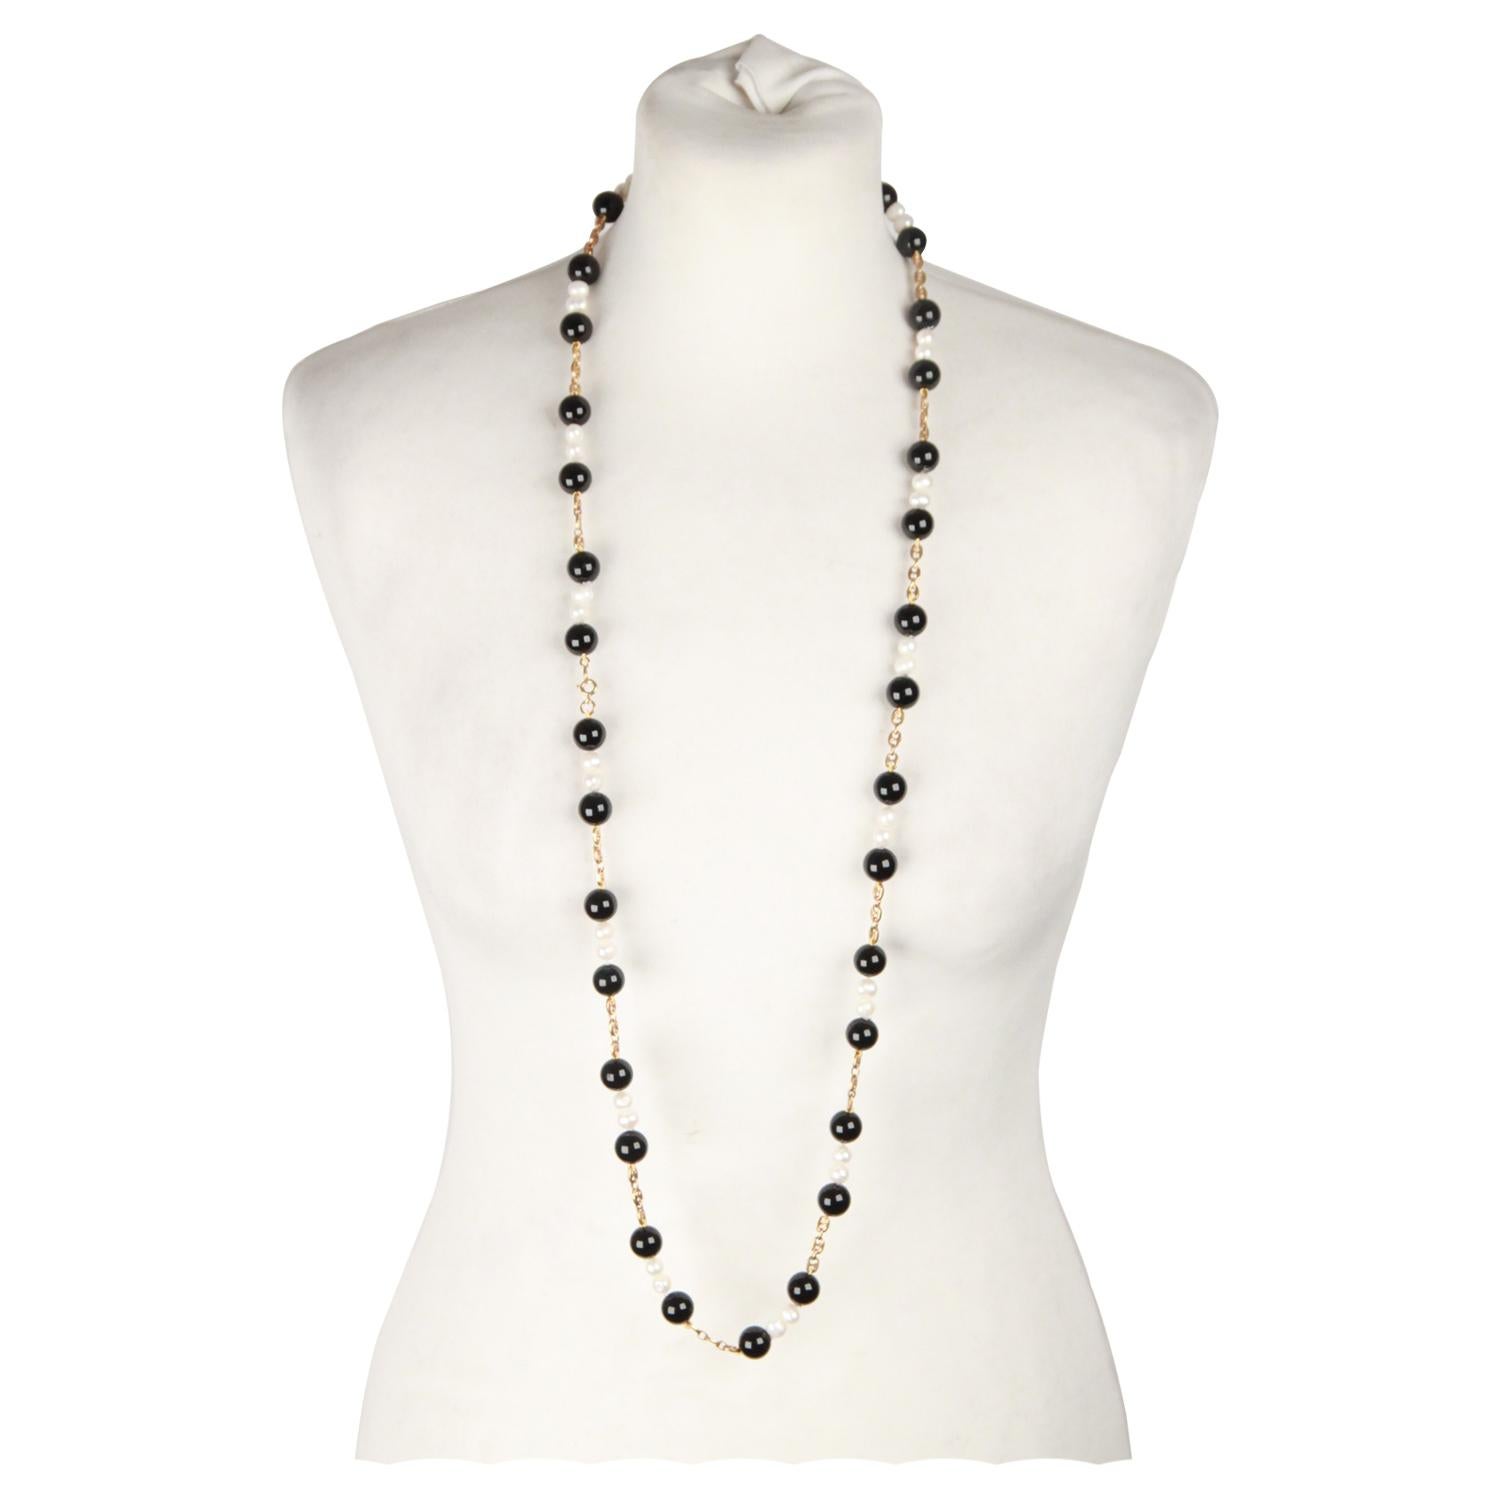 Women's Handmade in Italy Long Necklace with Black Onyx and Baroque Pearls and Beads